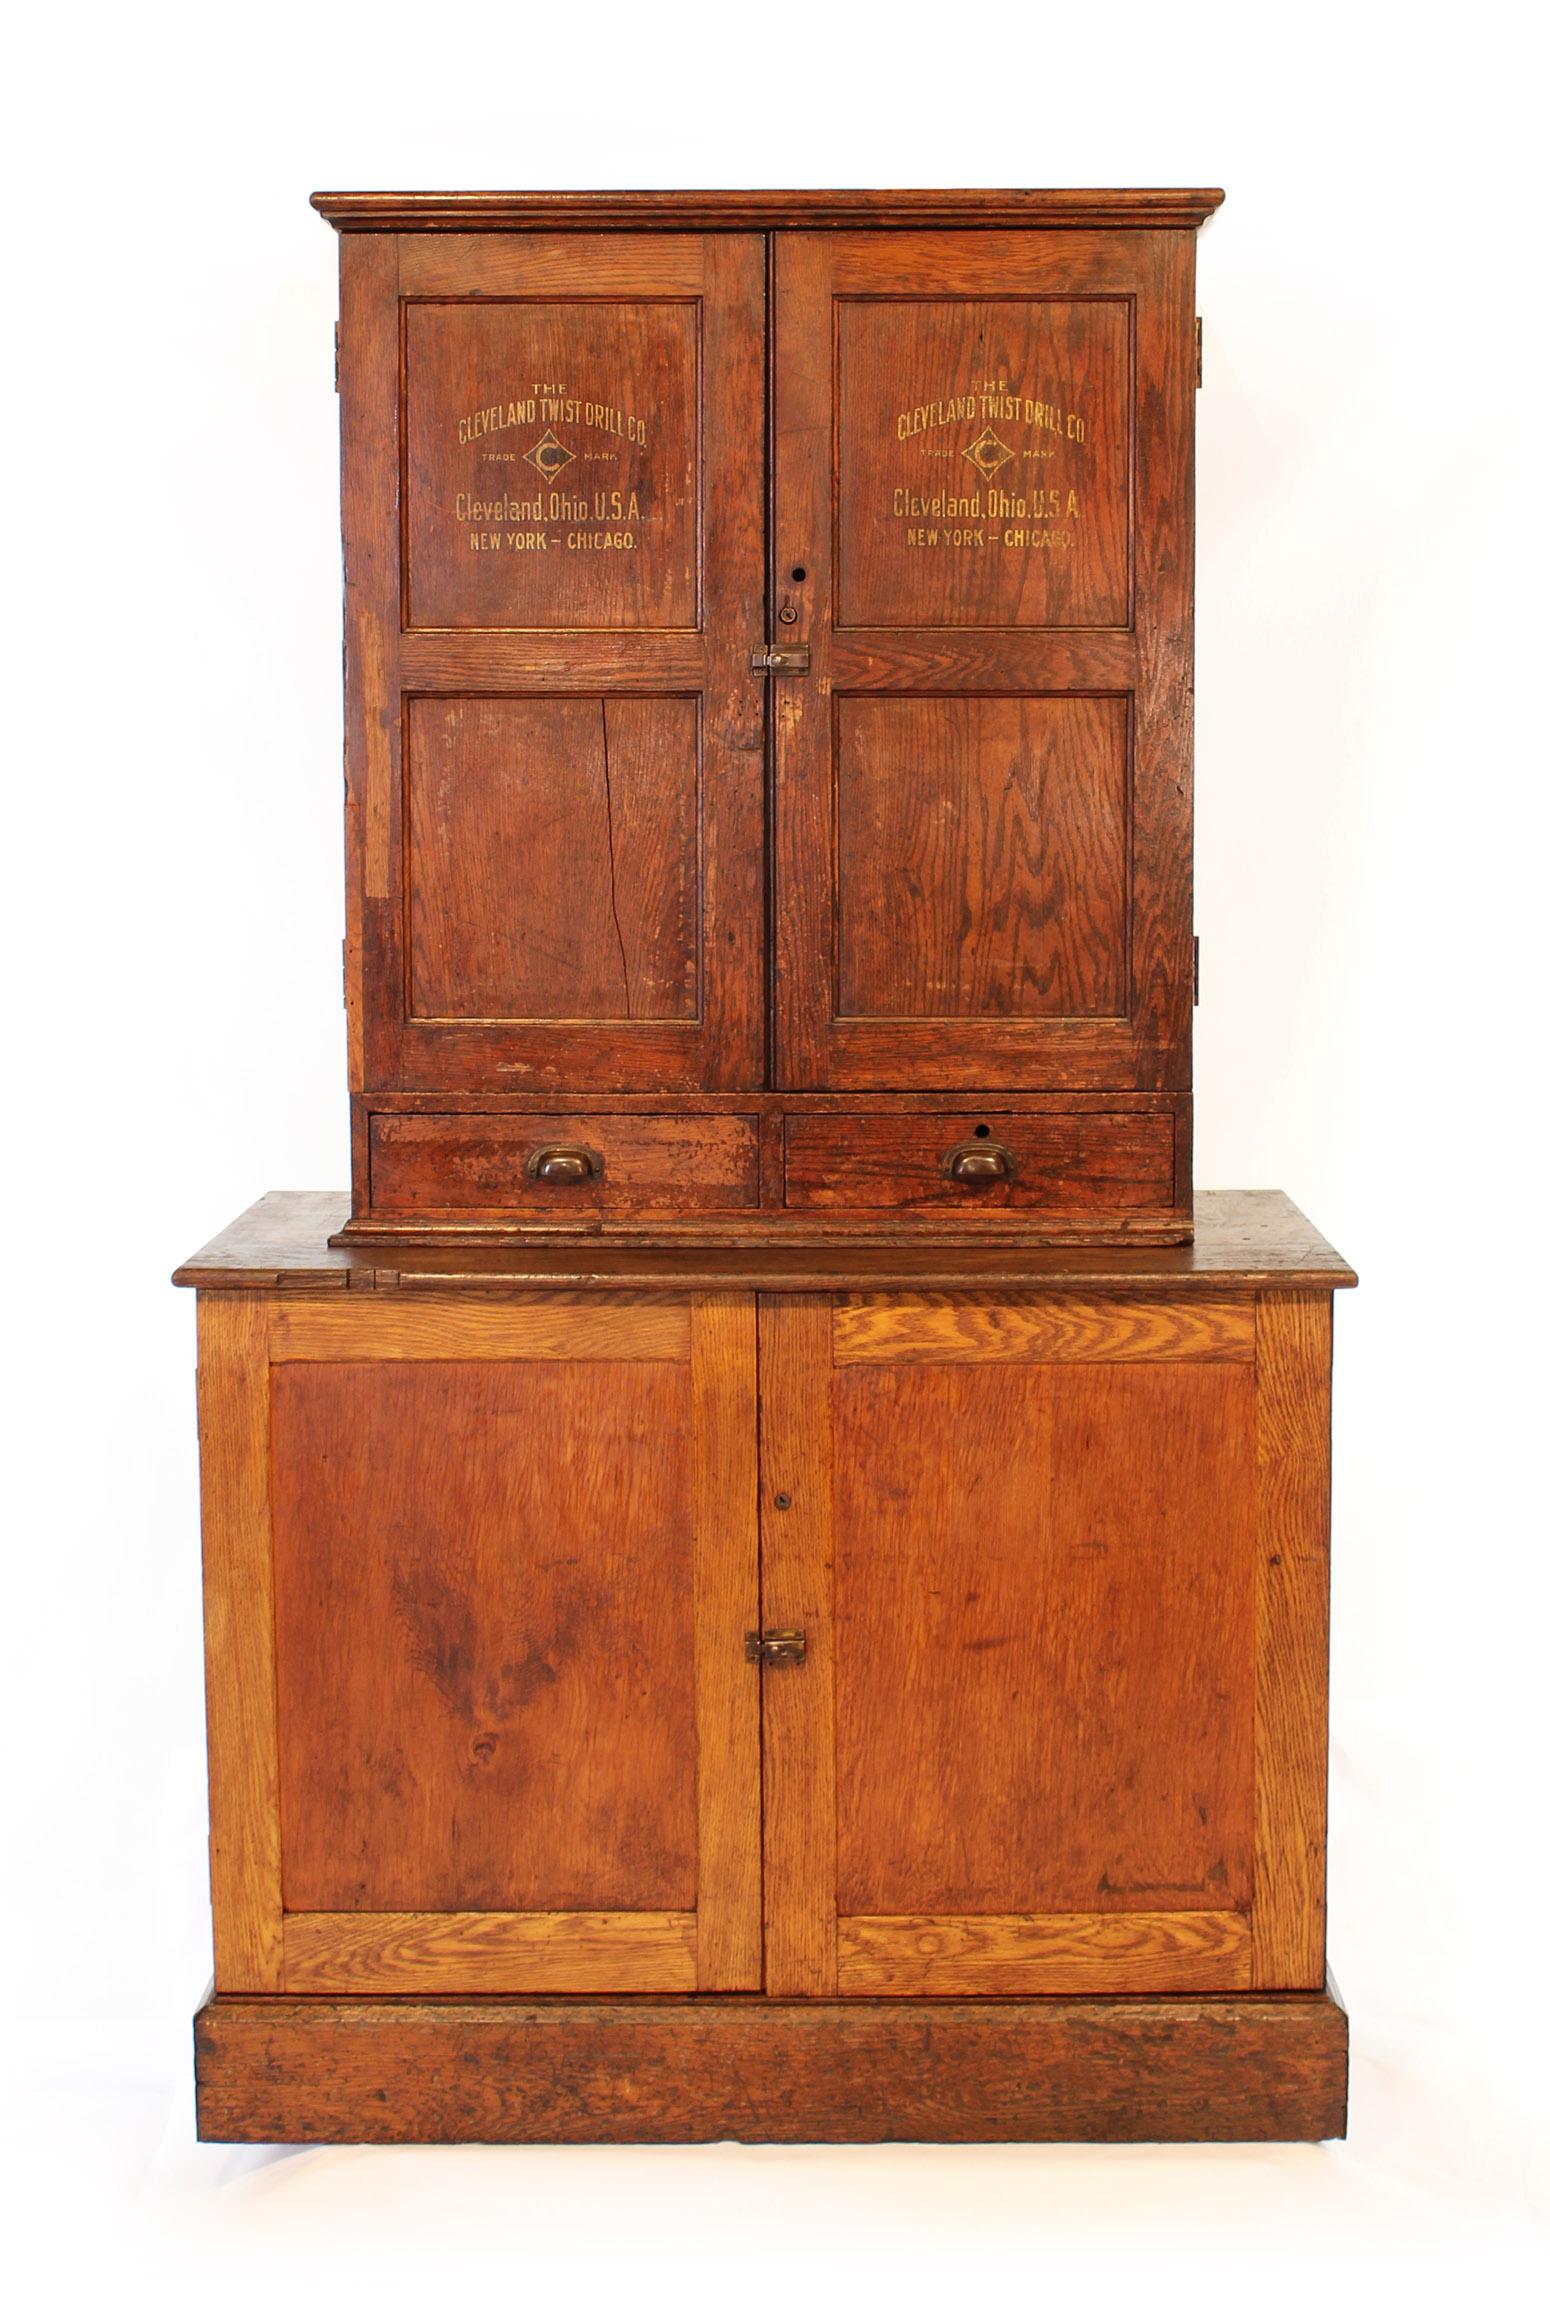 Authentic Cleveland Twist Drill oak machinist's cabinet used for storing drill bits and parts. Features brass hardware, 46 drawers, 52 cubby holes, oak drawer pulls, original reference charts on top inside doors. Has been lightly cleaned to preserve